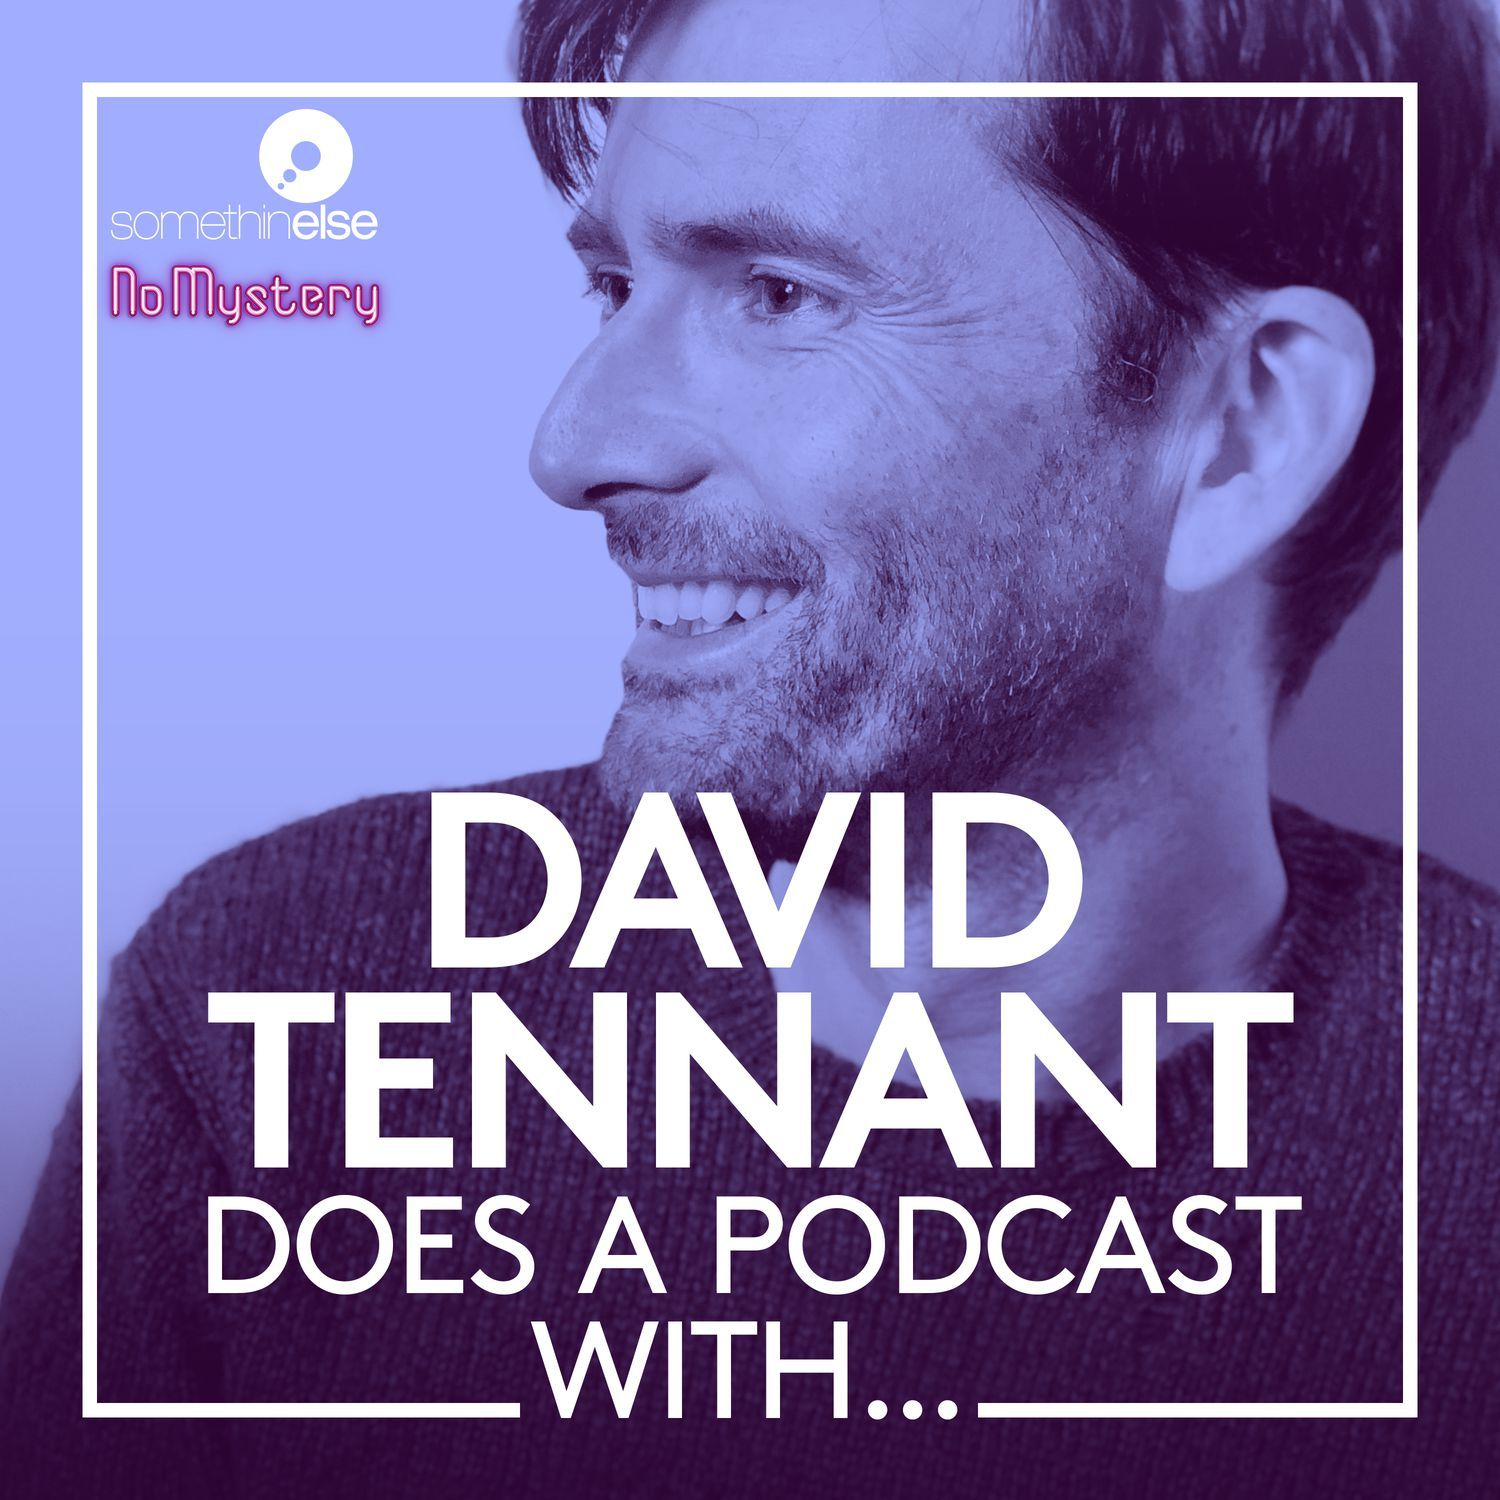 David Tennant Does a Podcast With...